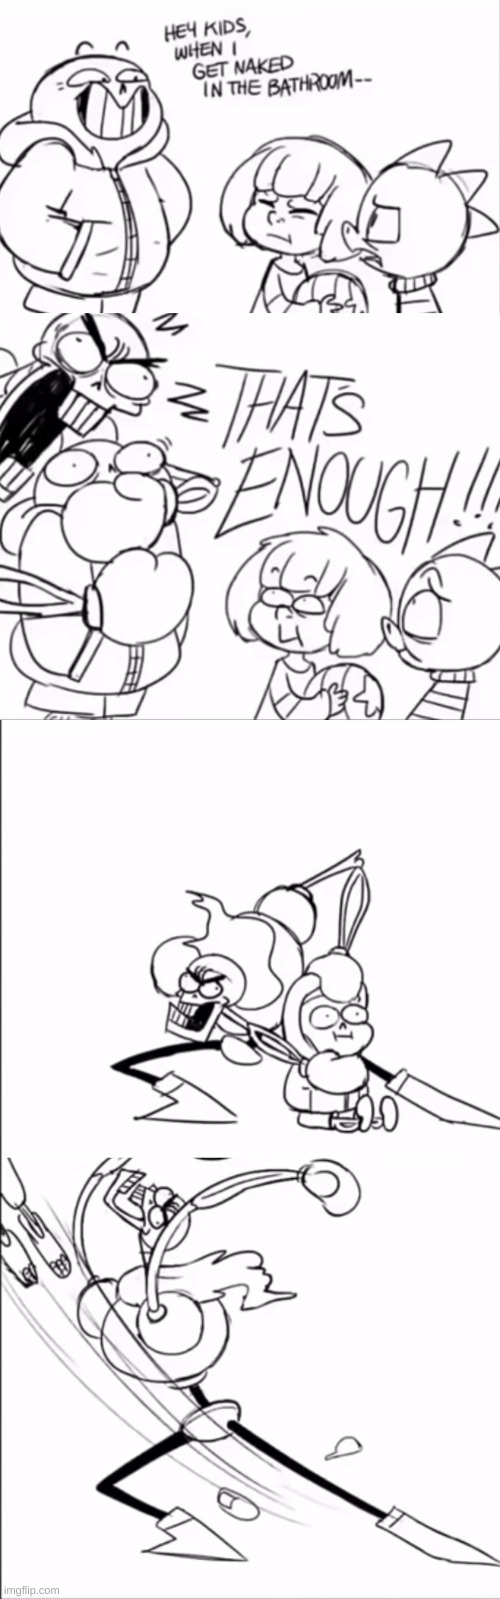 what did i just see lmao | image tagged in memes,funny,undertale,wtf,comics/cartoons | made w/ Imgflip meme maker